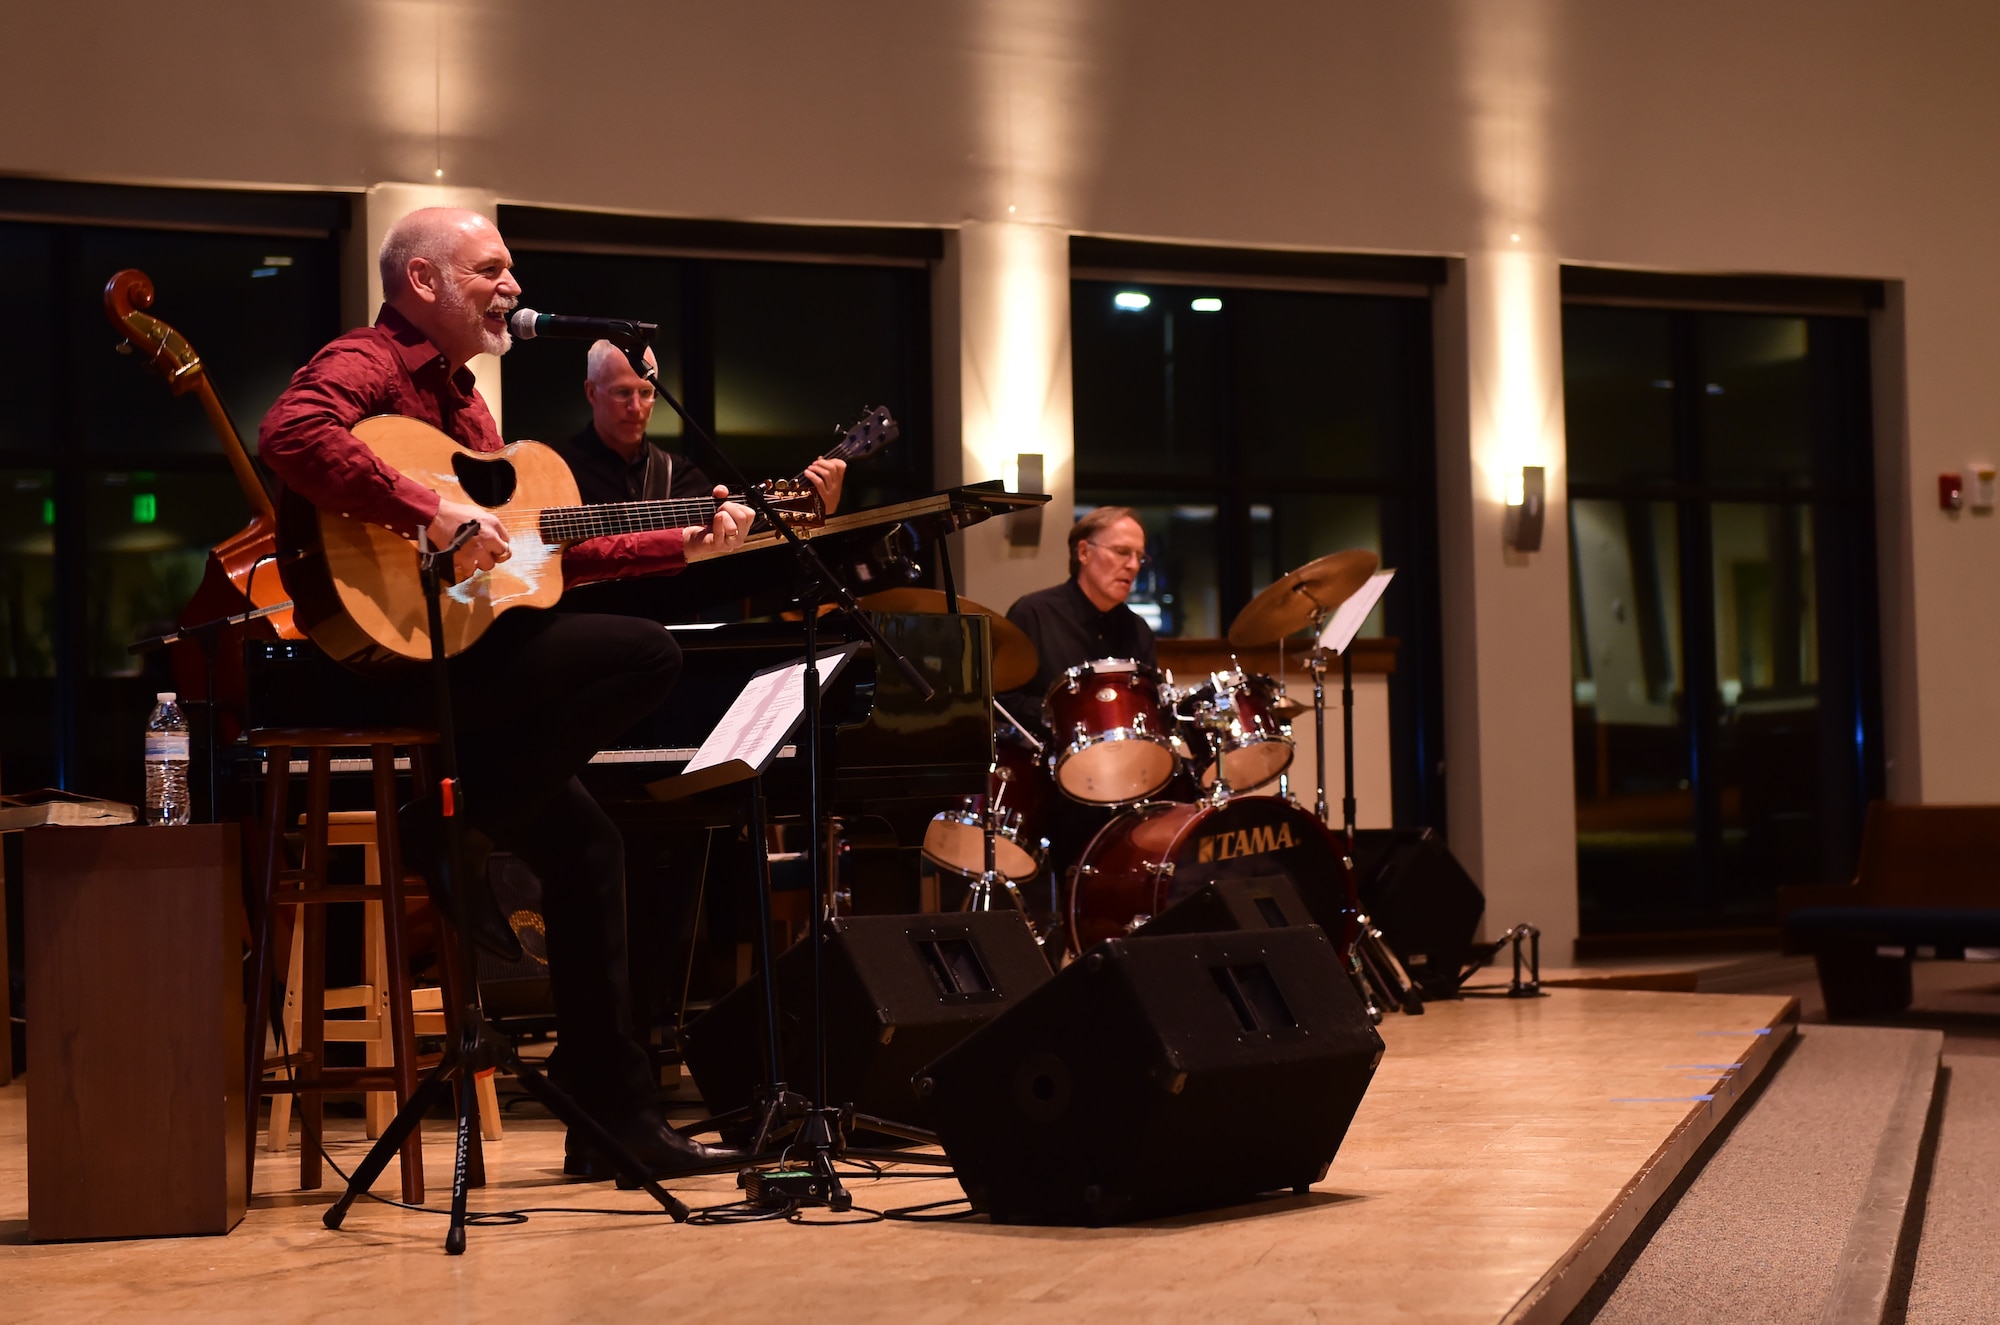 Danny Byram, a musician, plays at the Buckley Chapel with his band Feb. 12, 2016, on Buckley Air Force Base, Colo. Nicknamed “The Combat Musician,” Byram has performed at more than 100 U.S. military installations worldwide, more than any other Christian musician. (U.S. Air Force photo by Airman 1st Class Luke W. Nowakowski/Released)